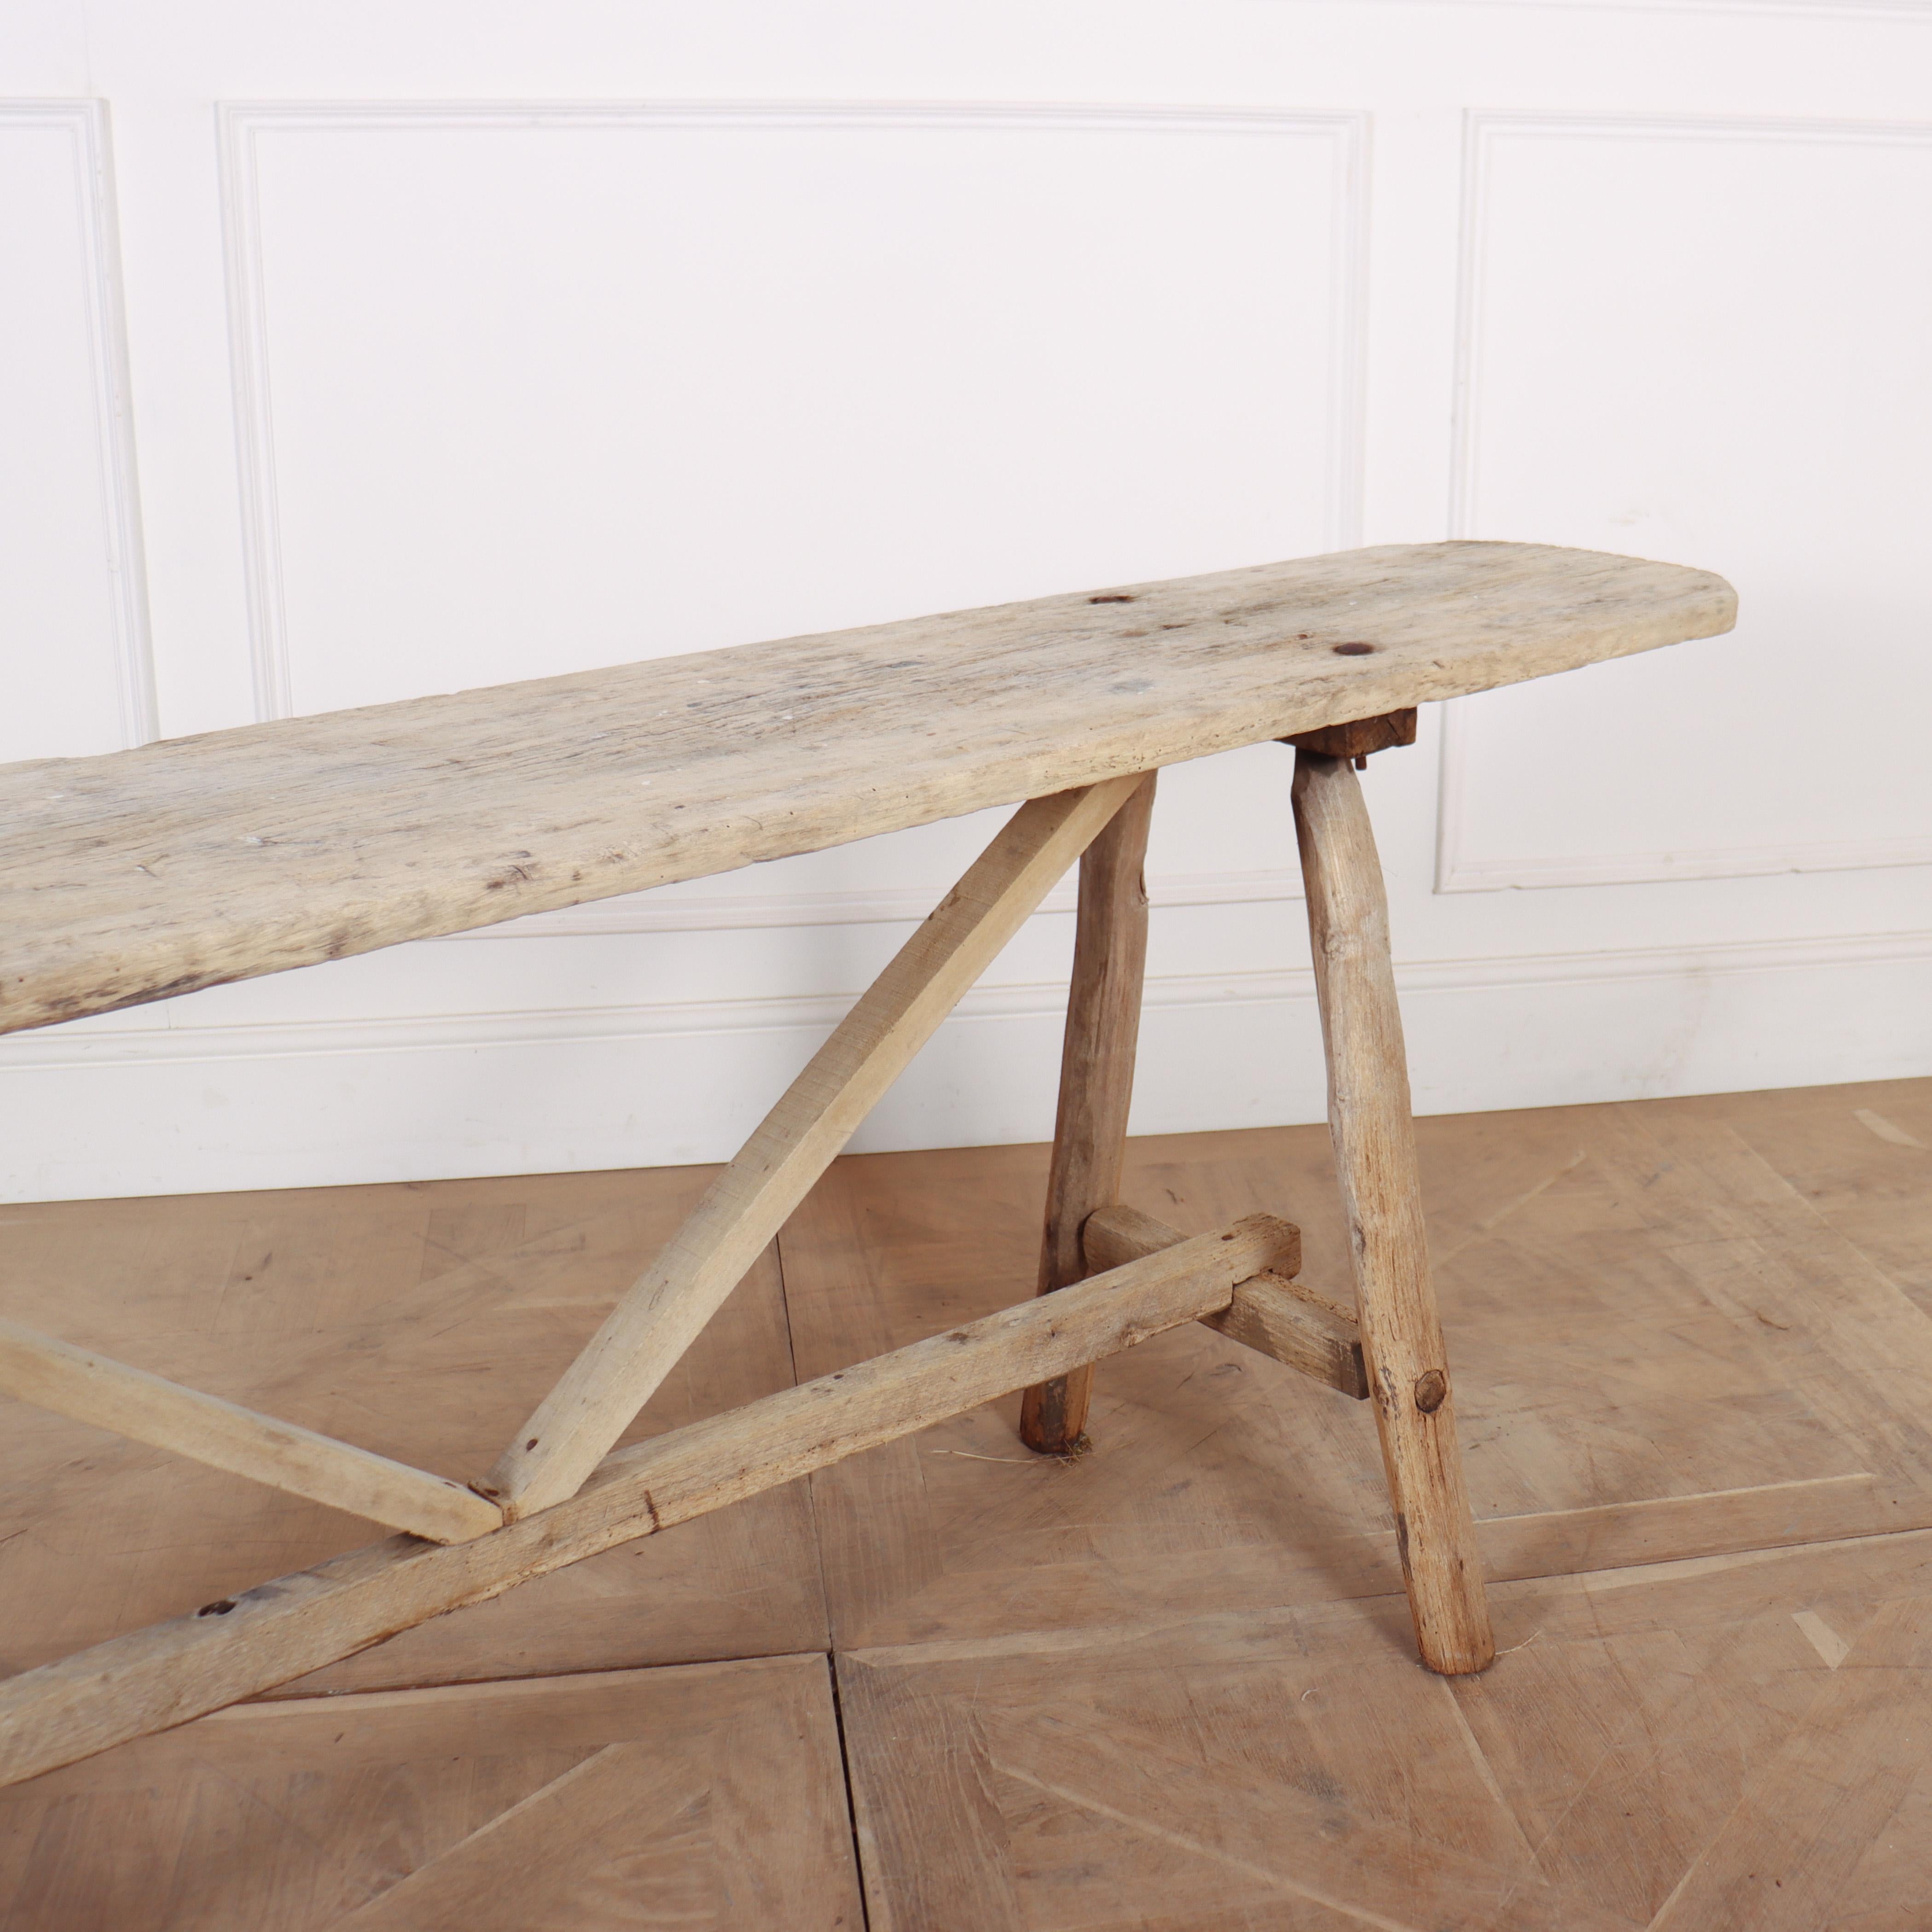 19th C French bleached and scrubbed oak and poplar trestle table. 1880

Ref: E

Top depth is 14